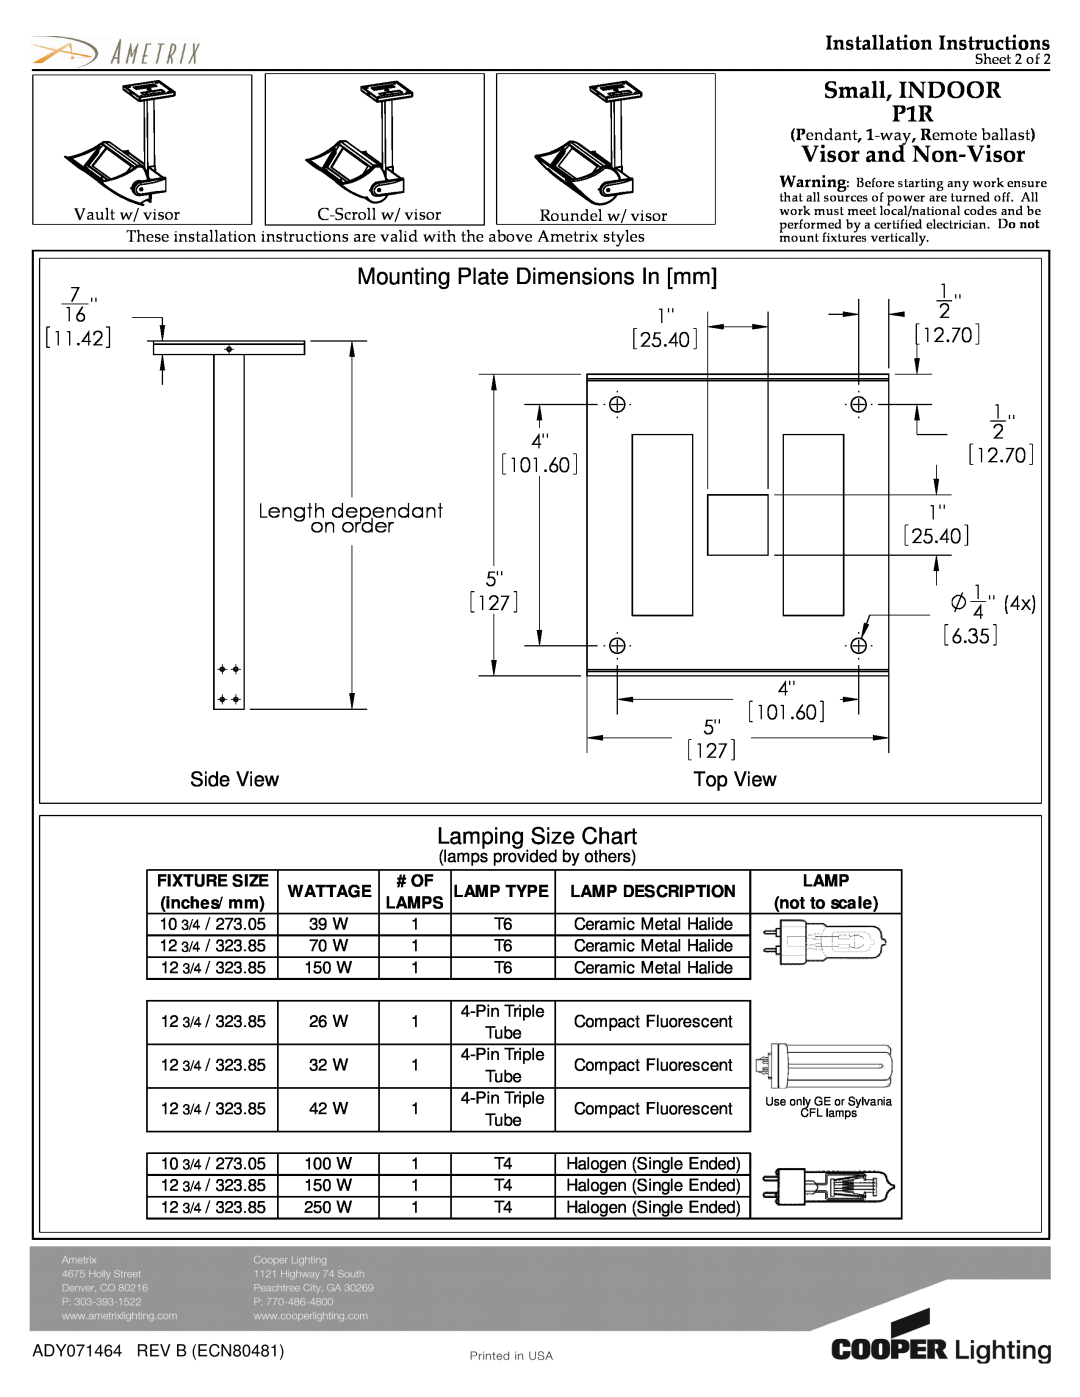 Cooper Lighting ADY071464 Small, INDOOR P1R, Visor and Non-Visor, Mounting Plate Dimensions In mm, Lamping Size Chart 